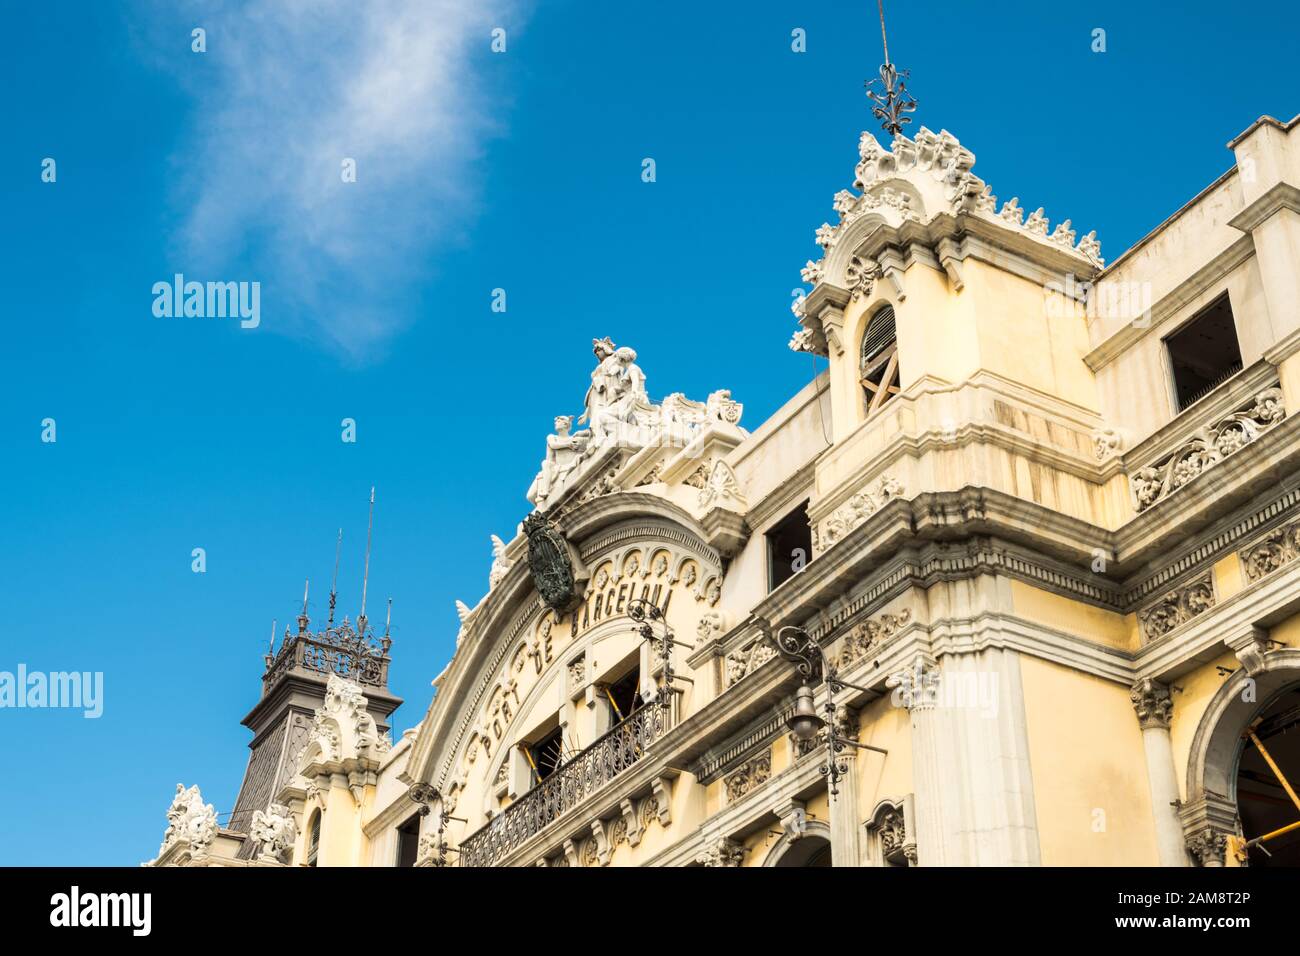 Charming buildings Stock Photo